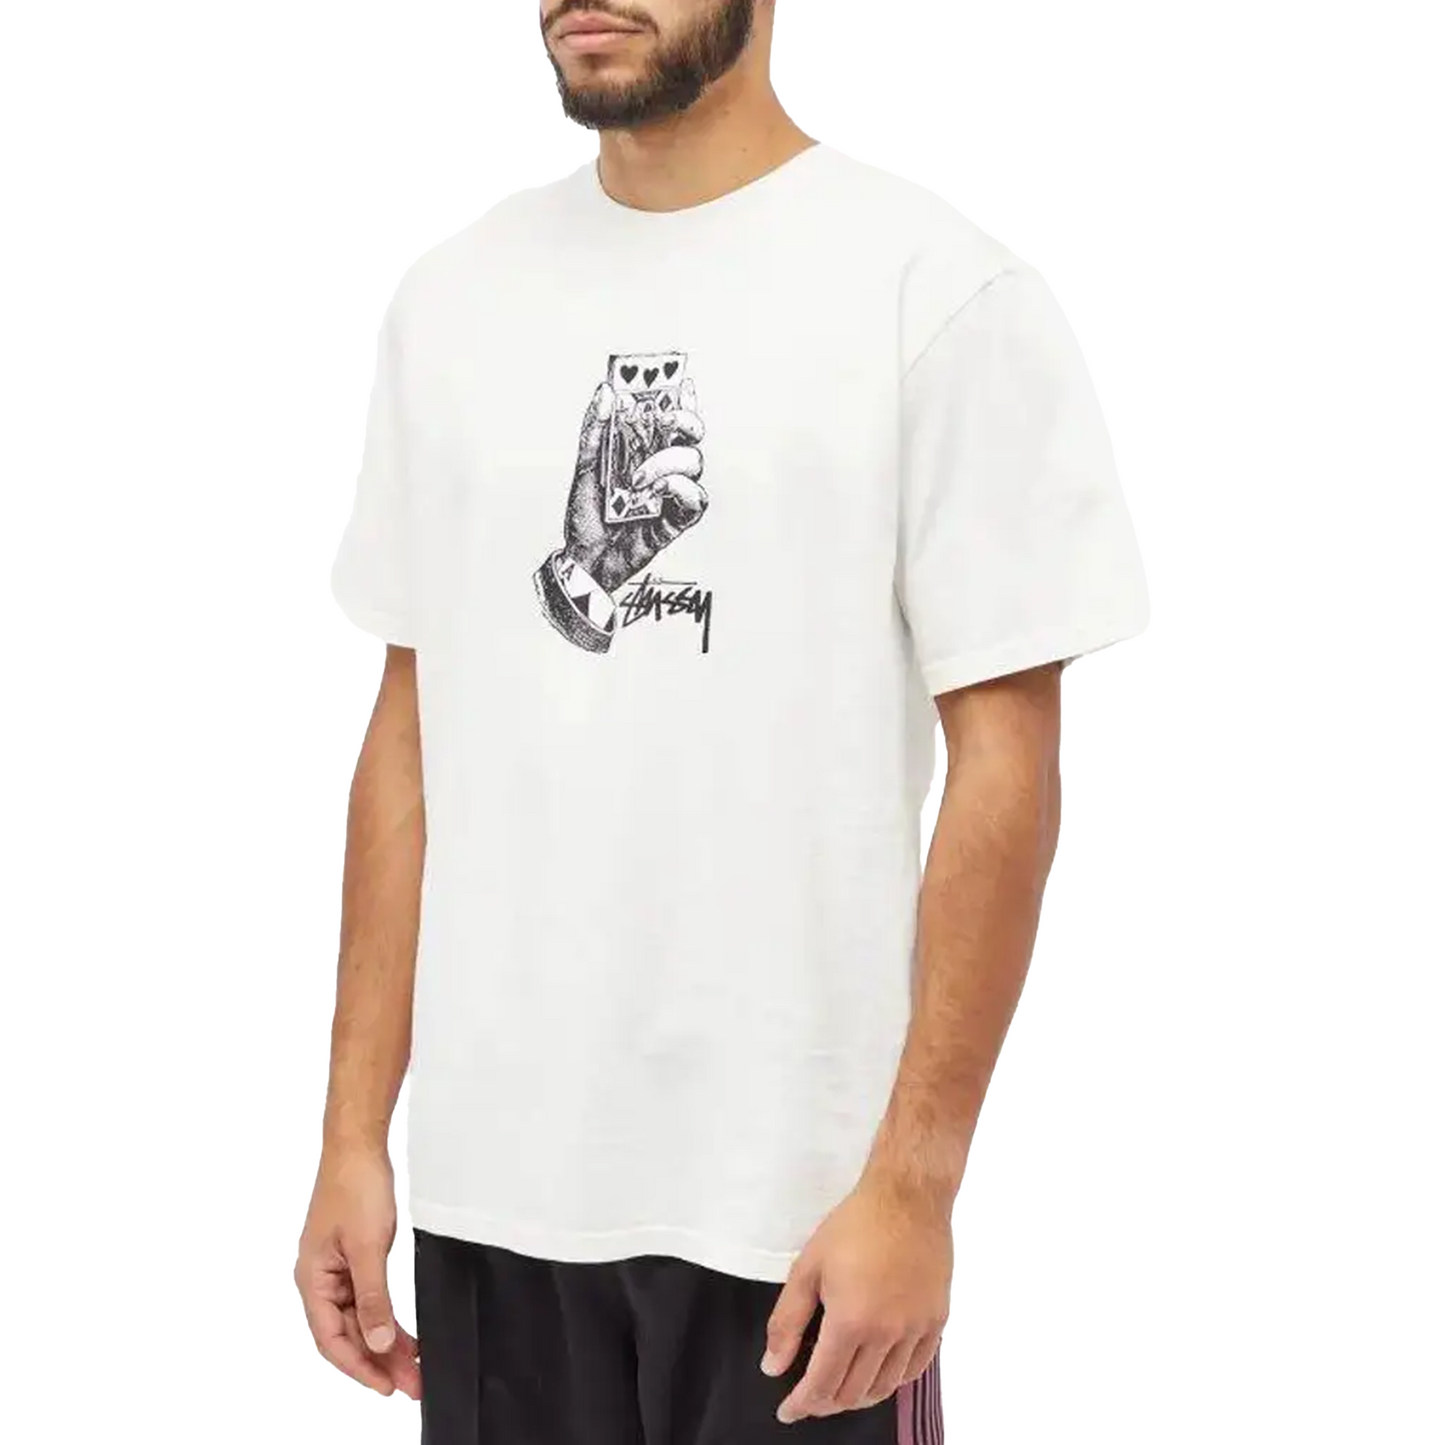 Stussy | All Bets Off Pig Dyed Tee Natural